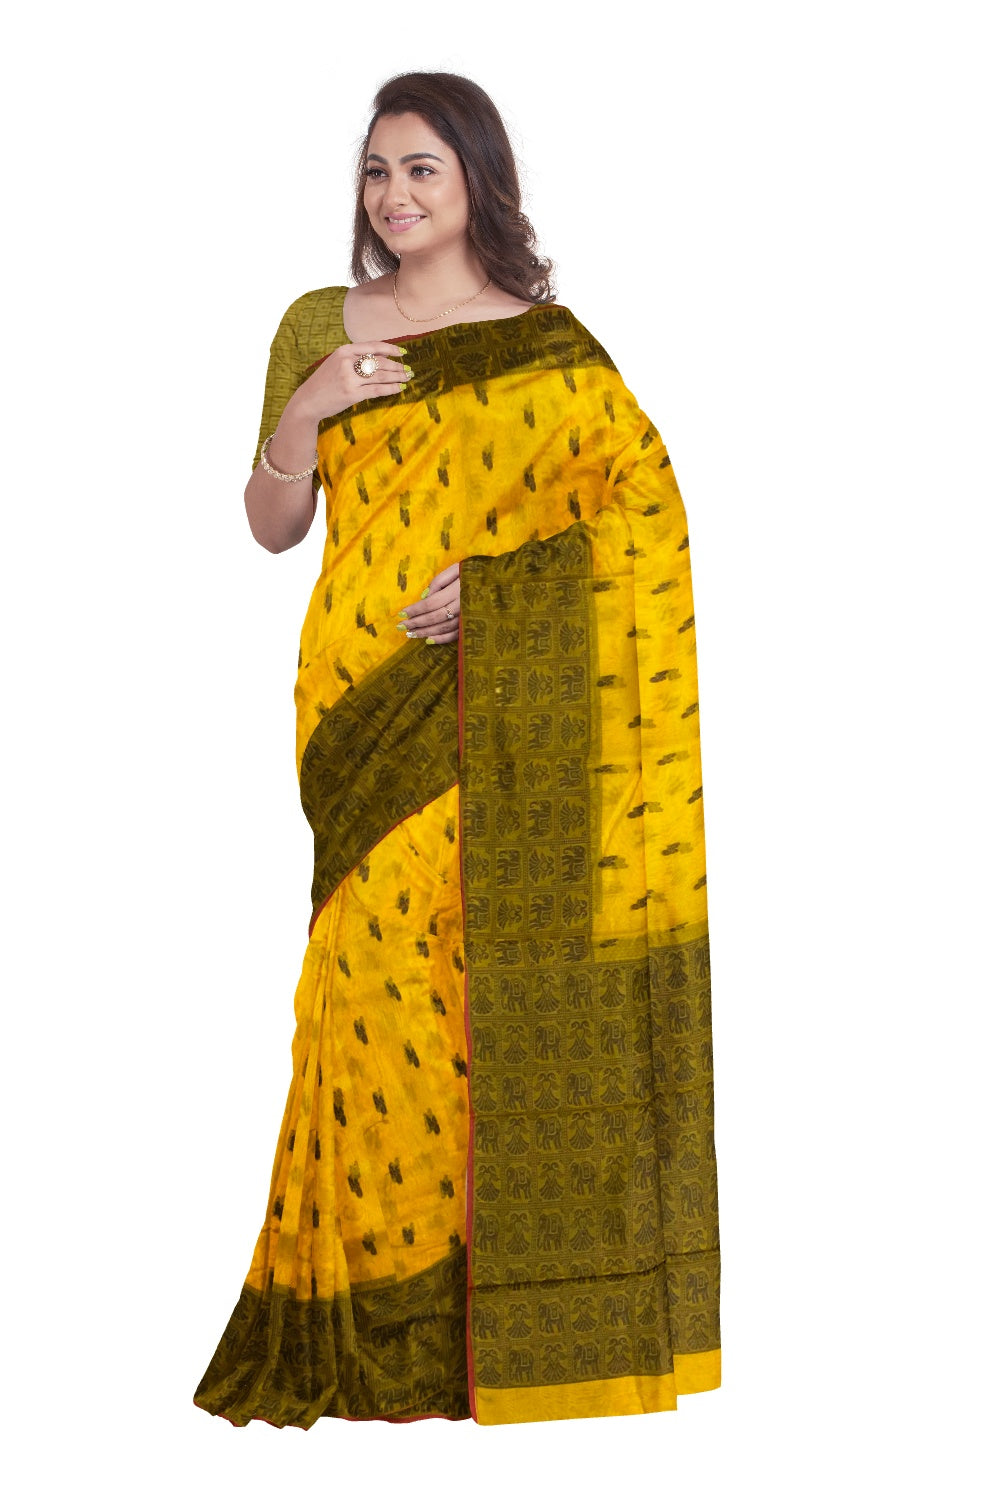 Southloom Sico Gadwal Semi Silk Saree in Mustard Yellow and Olive Green with Elephant Motifs (Blouse Piece with Work)